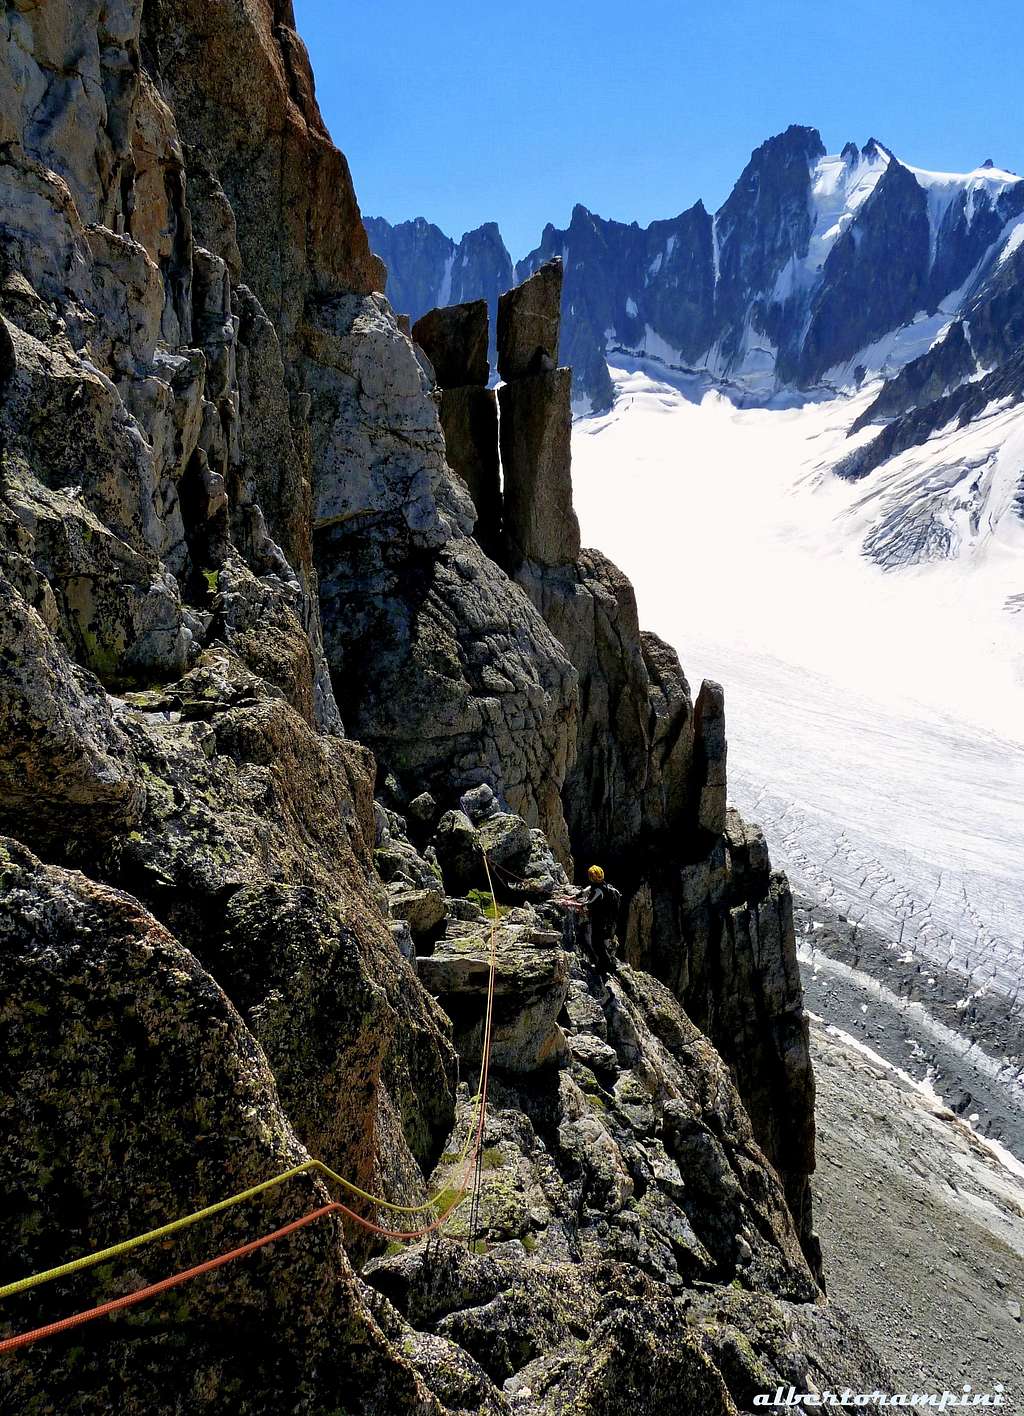 Downclimbing from the summit of Aiguille du Refuge